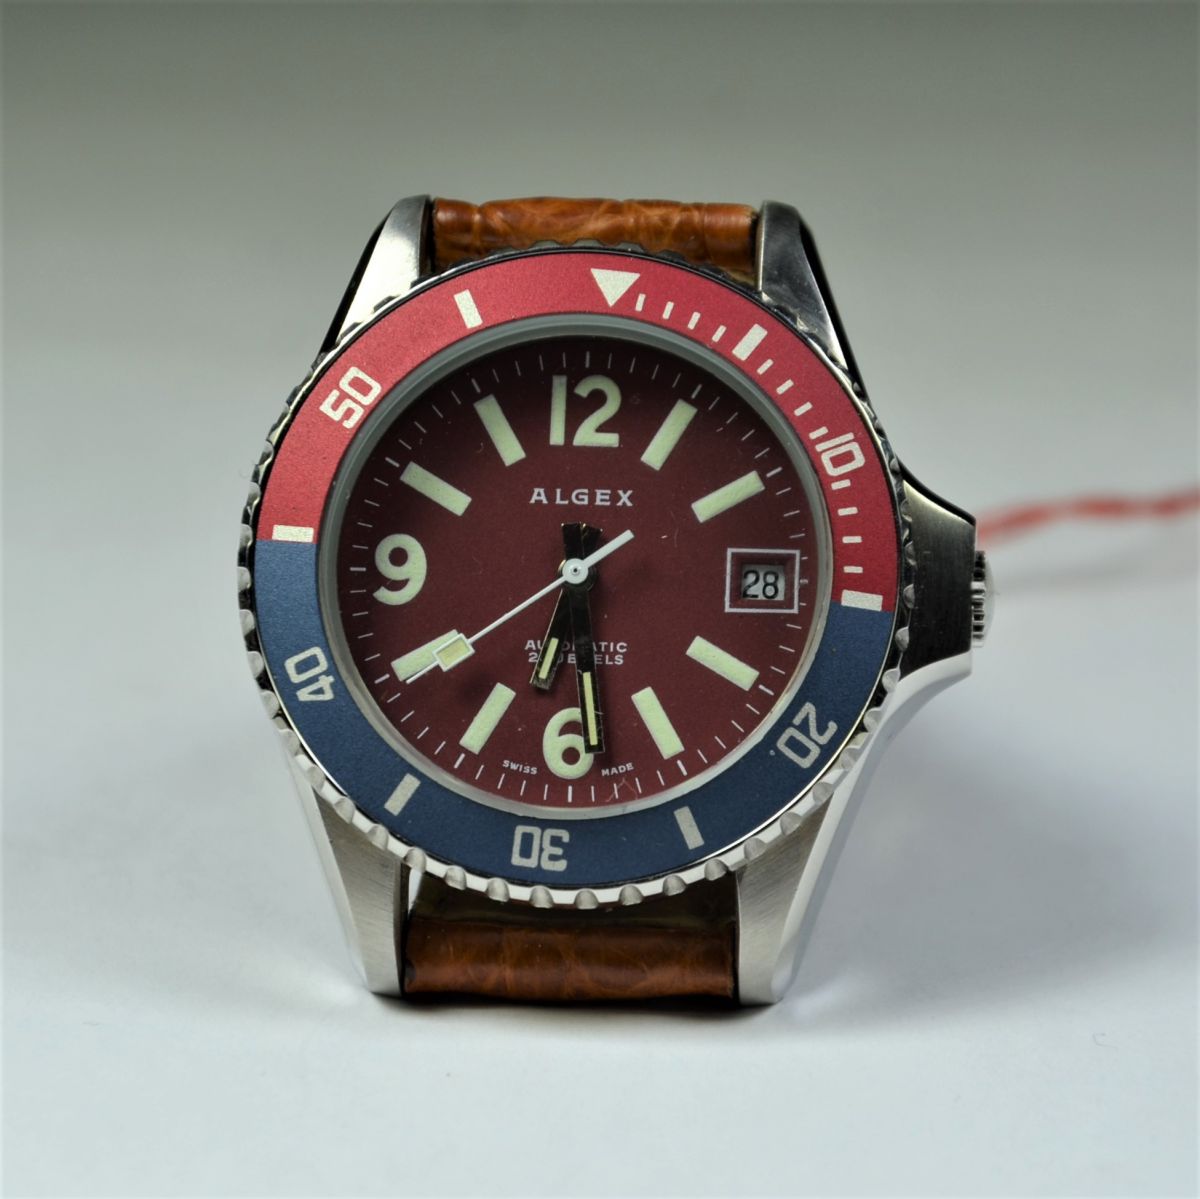 ALGEX waterproof wristwatch. Automatic, calendar, diameter 36 mm. New old stock form the 90th